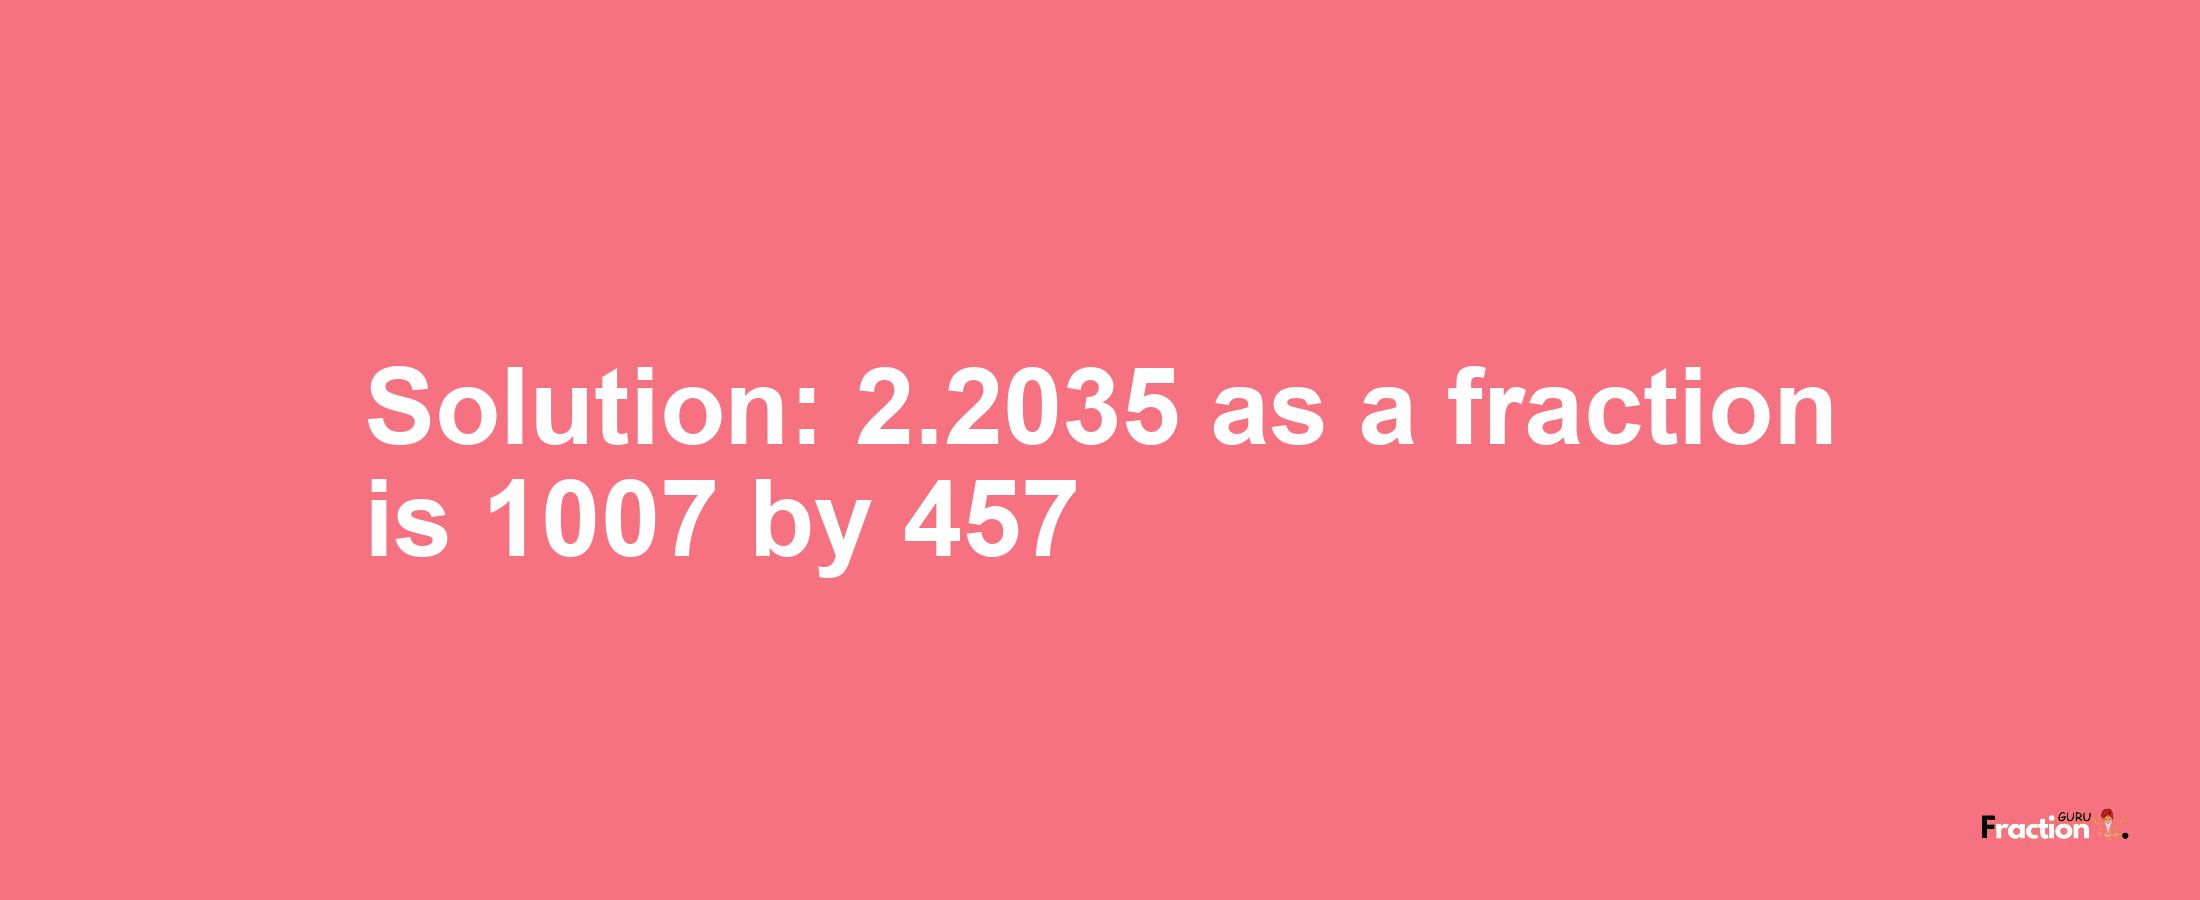 Solution:2.2035 as a fraction is 1007/457